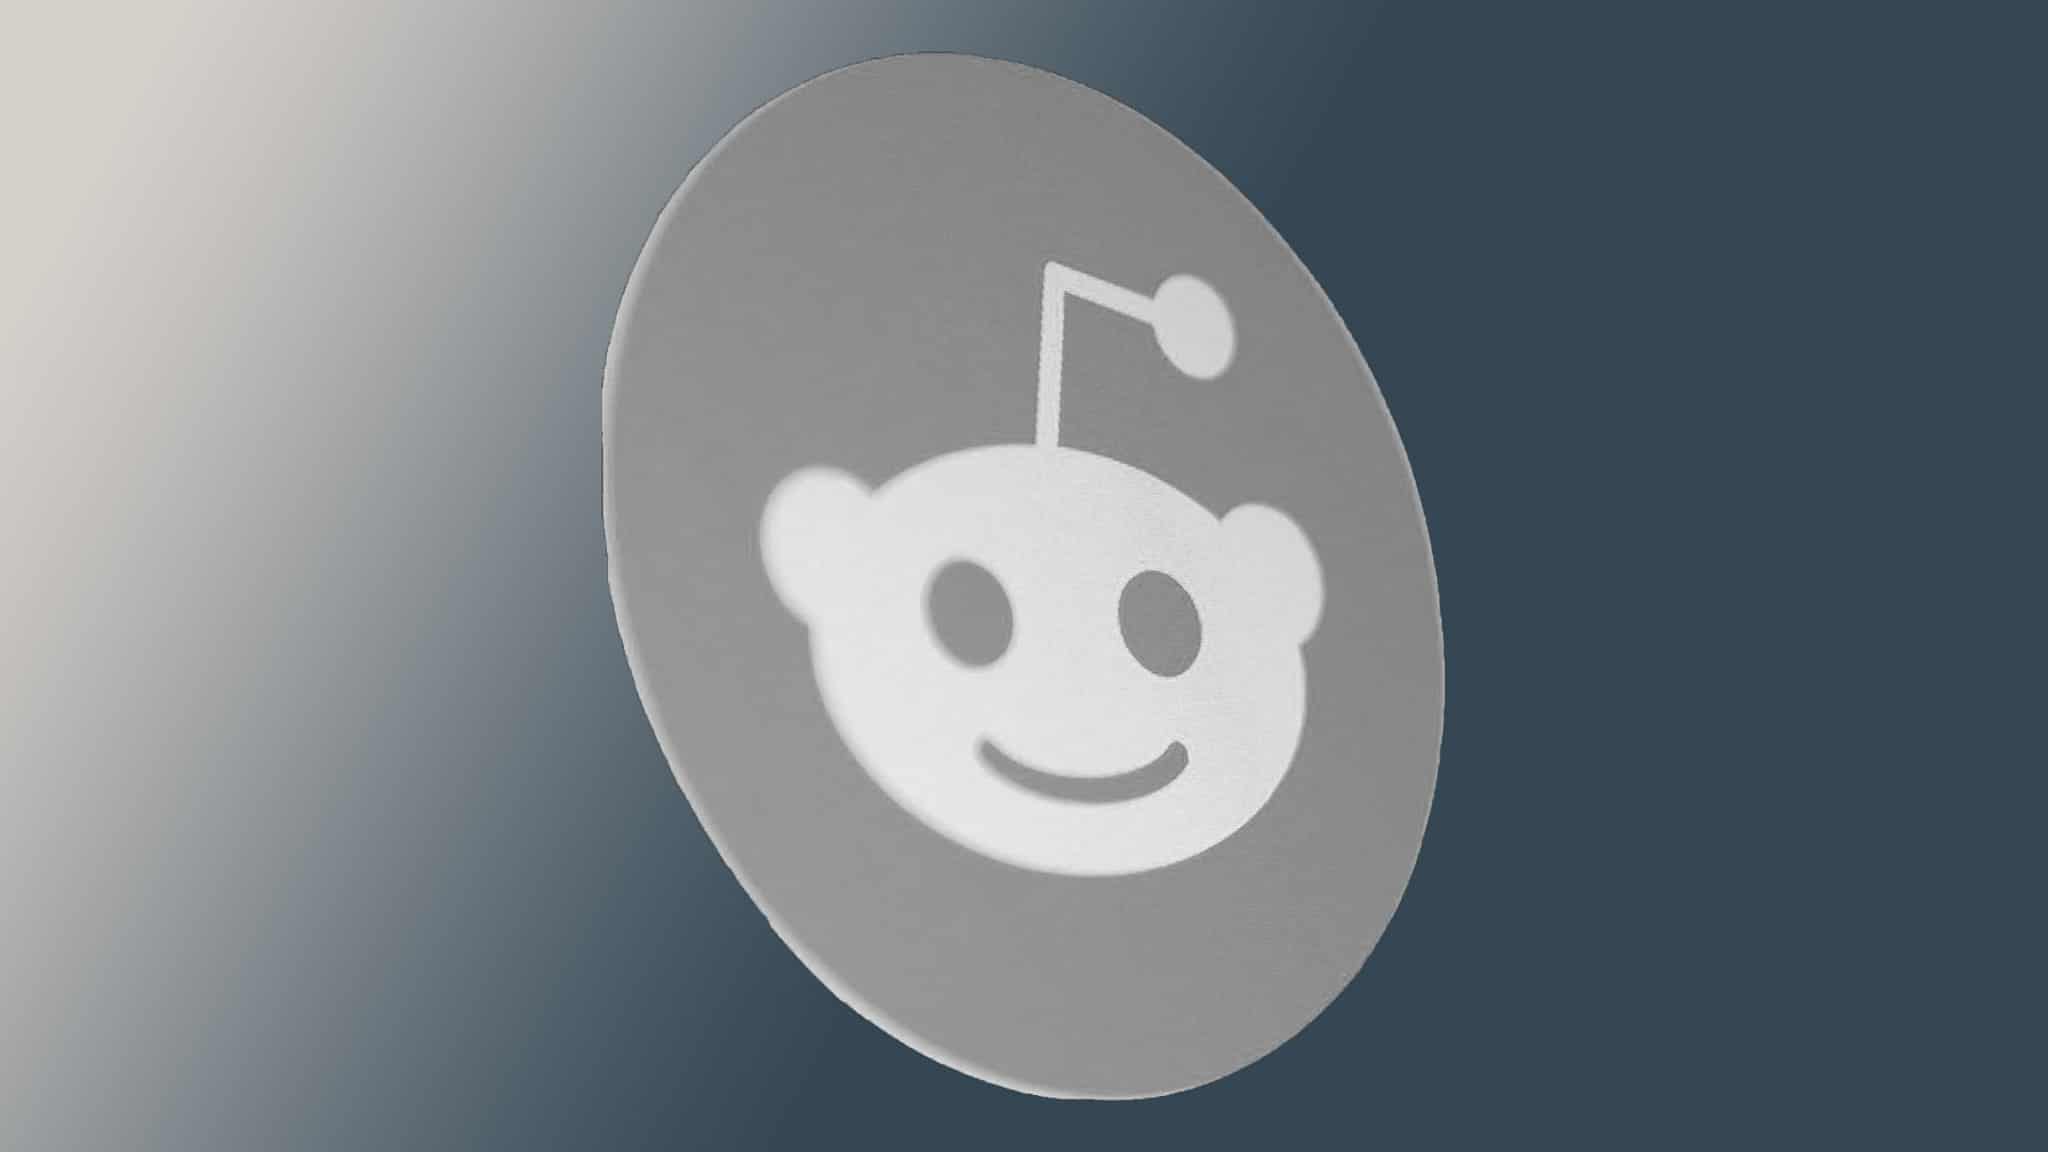 Top 20 Reddit communities that have gone private during Reddit blackout